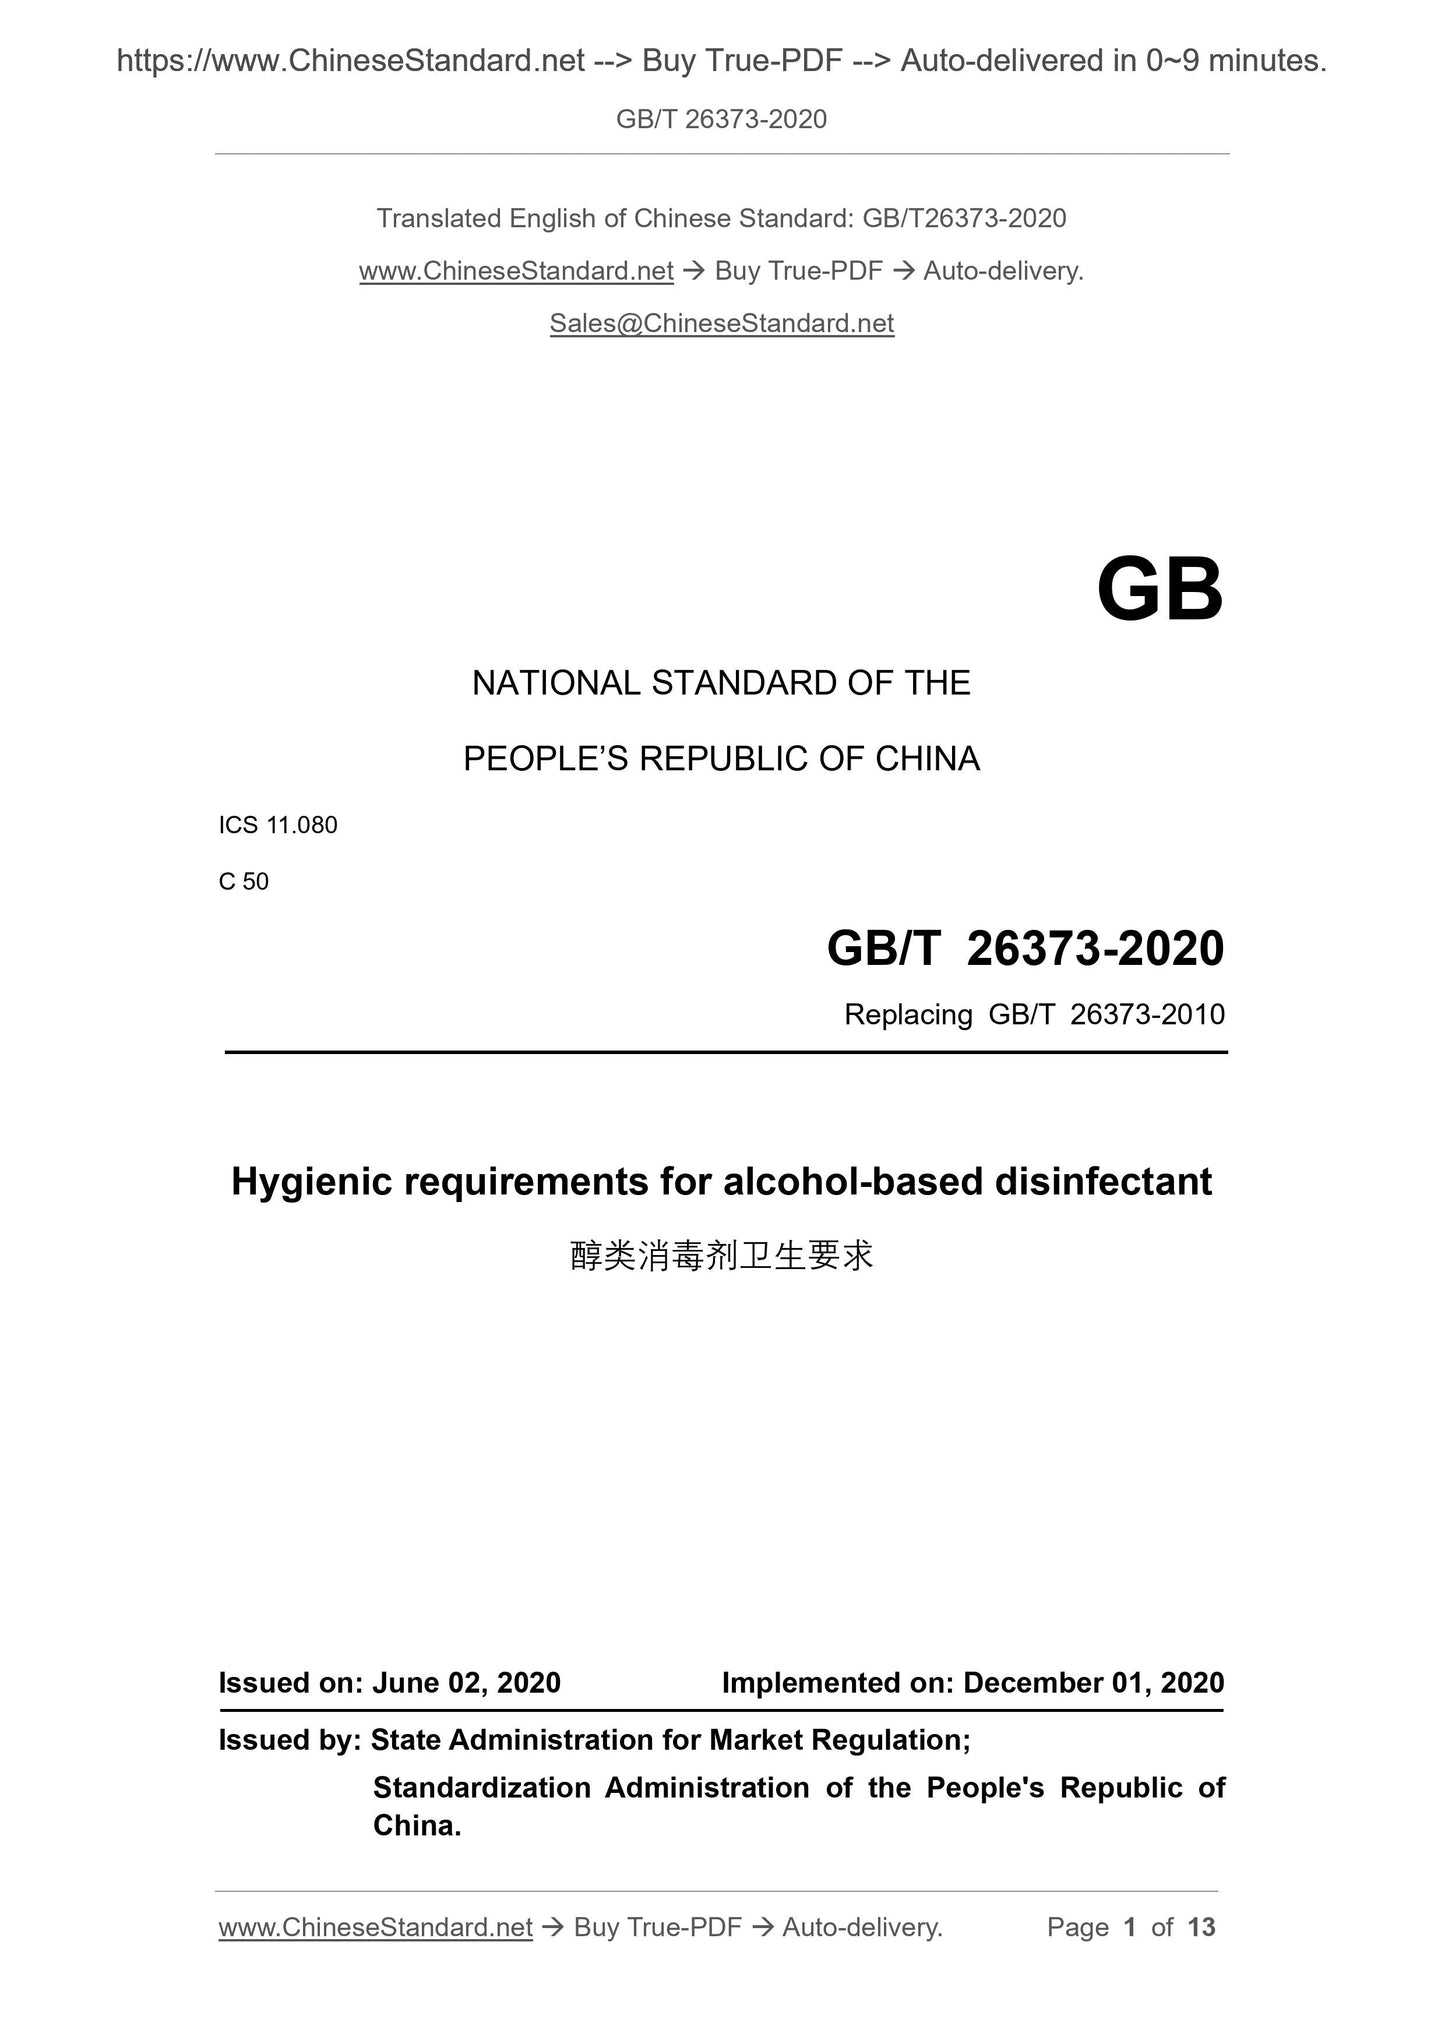 GB/T 26373-2020 Page 1